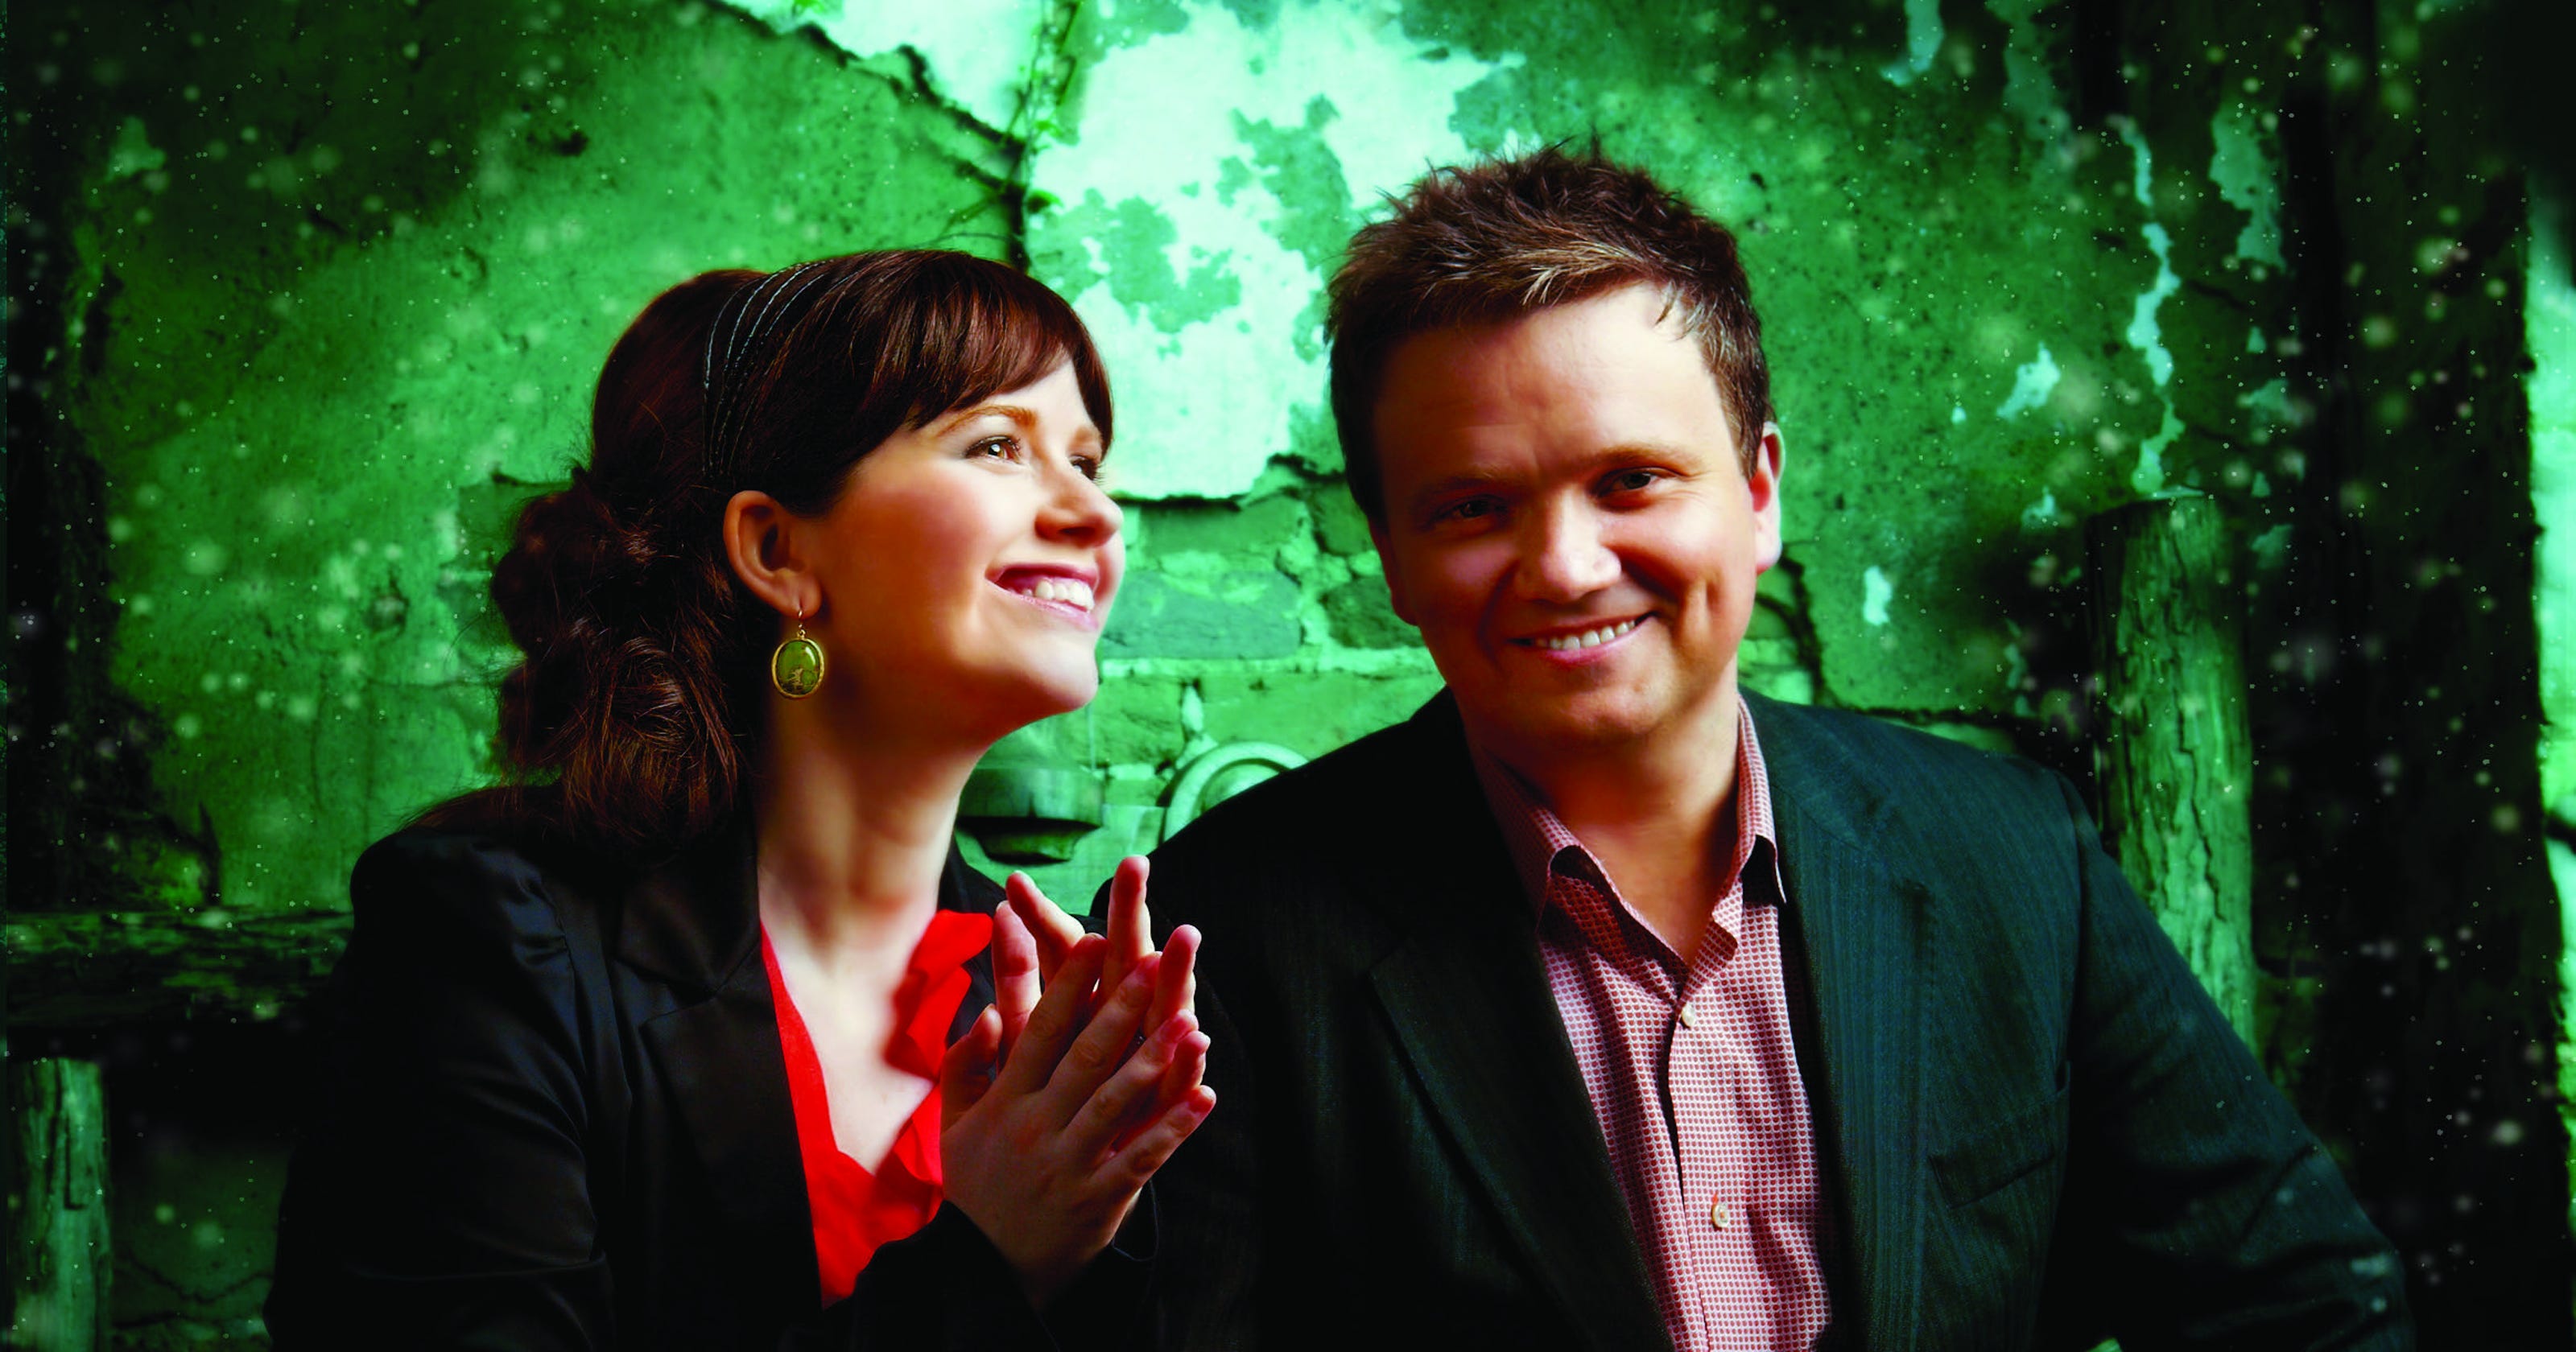 keith and kristyn getty tour